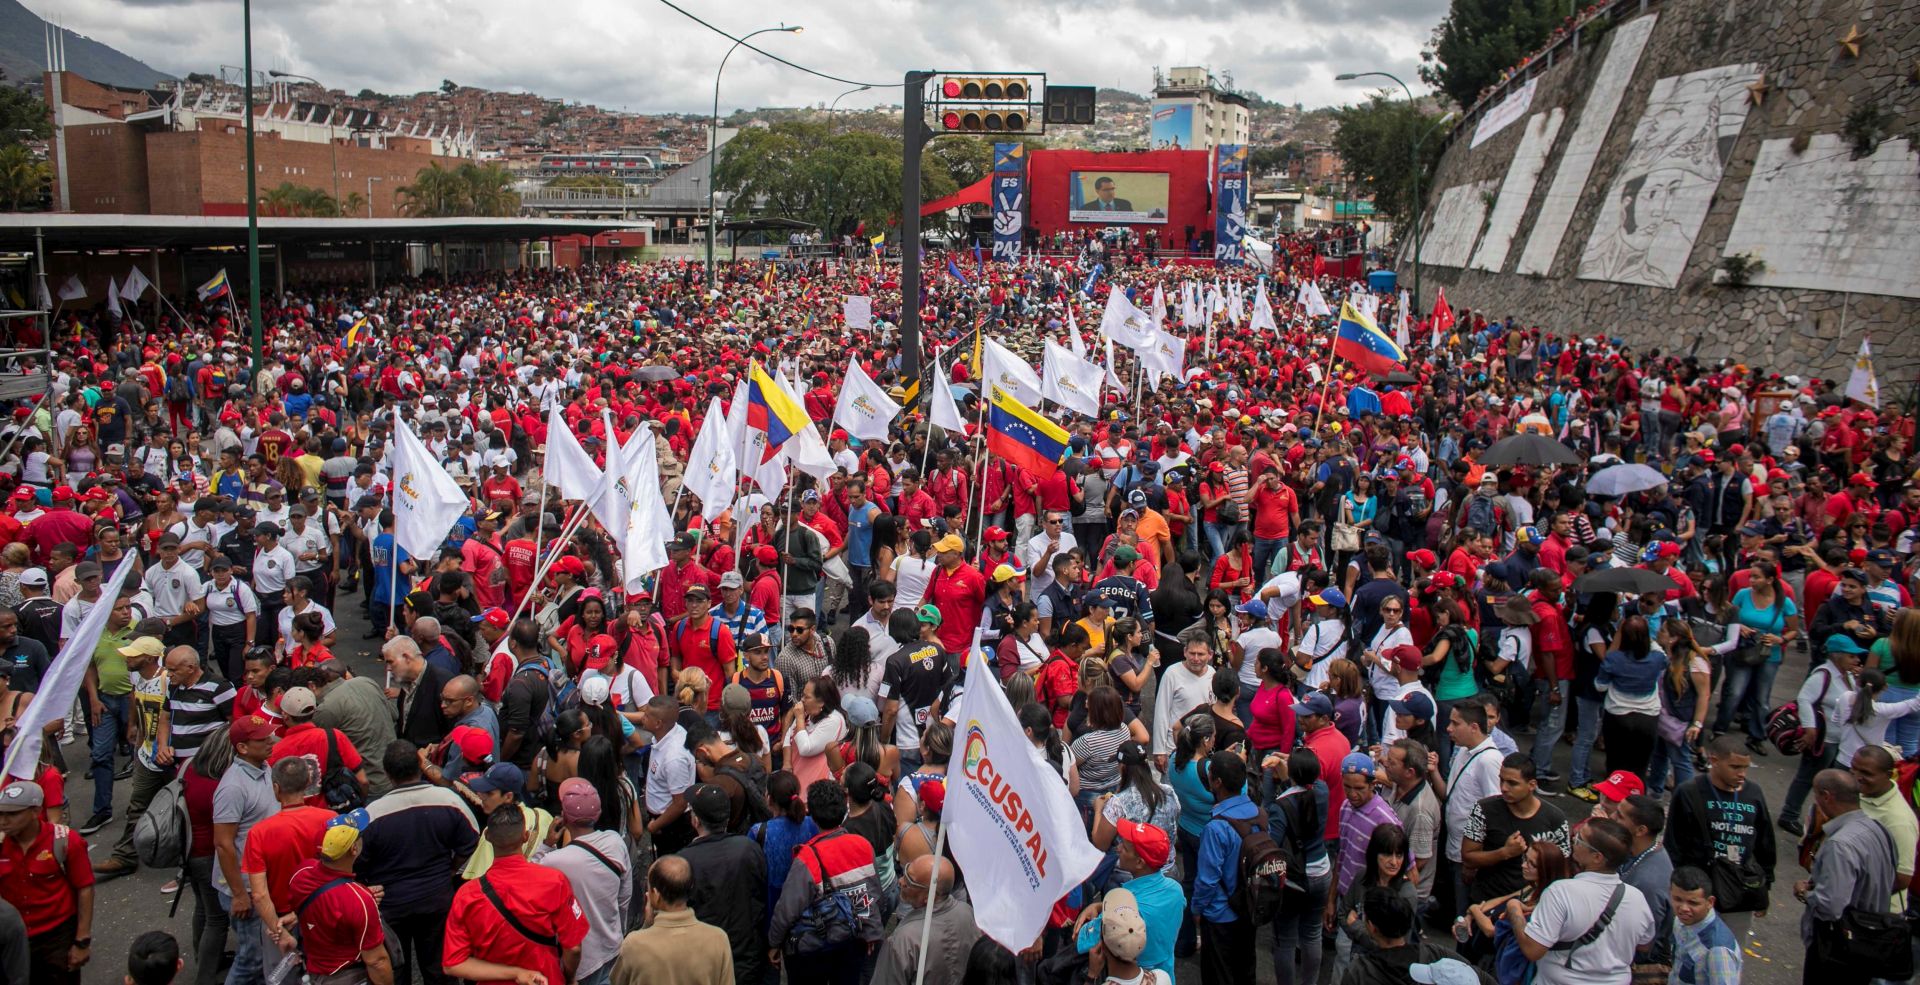 epa07402431 Supporters of Chavismo participate in a march that commemorates the 30 years of the Caracazo, in Caracas, Venezuela, 27 February 2019. On 27 February 1989, Caracas was the epicenter of a wave of protests over the economic situation in the country that generated strong disturbances and spread to other cities leaving hundreds of dead.  EPA/Miguel Gutiérrez